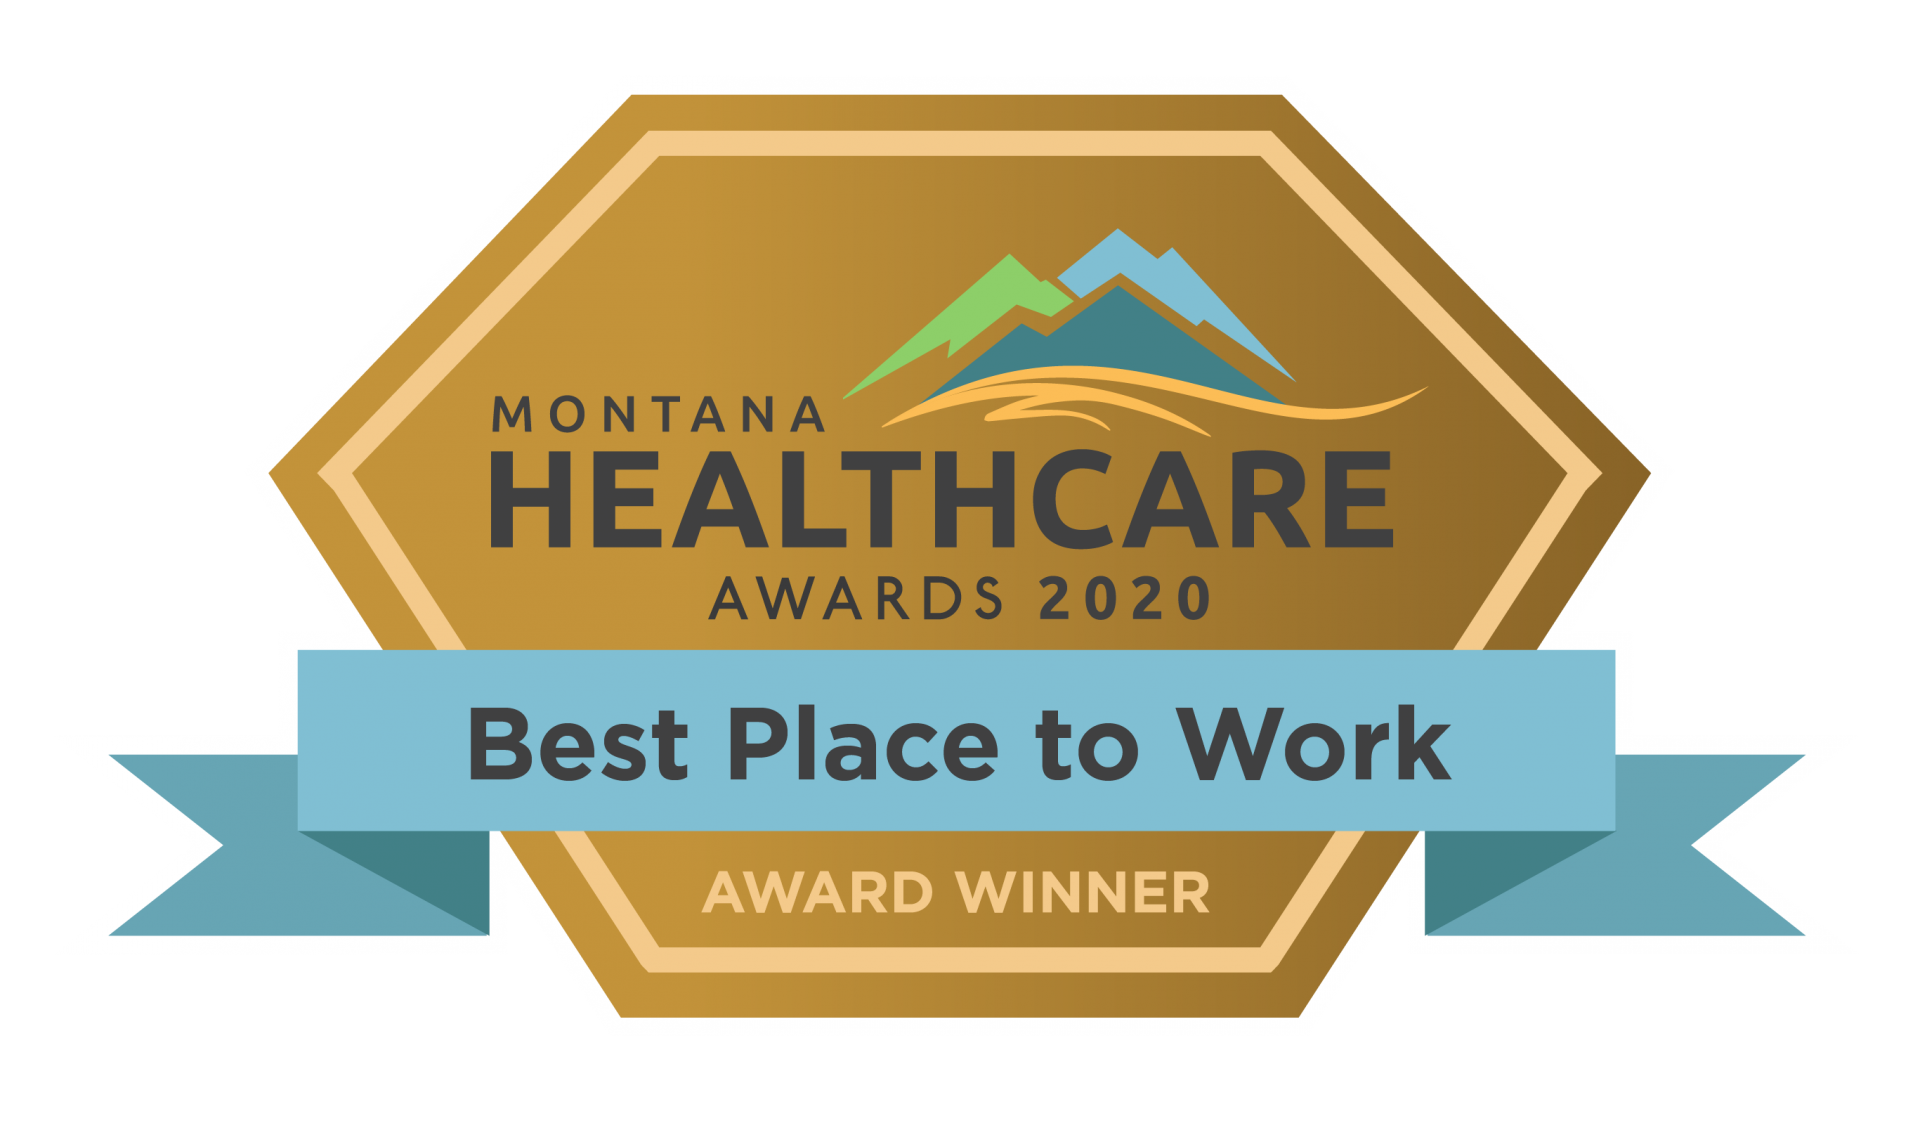 Montana Healthcare Awards 2020 Best Place to Work Logo